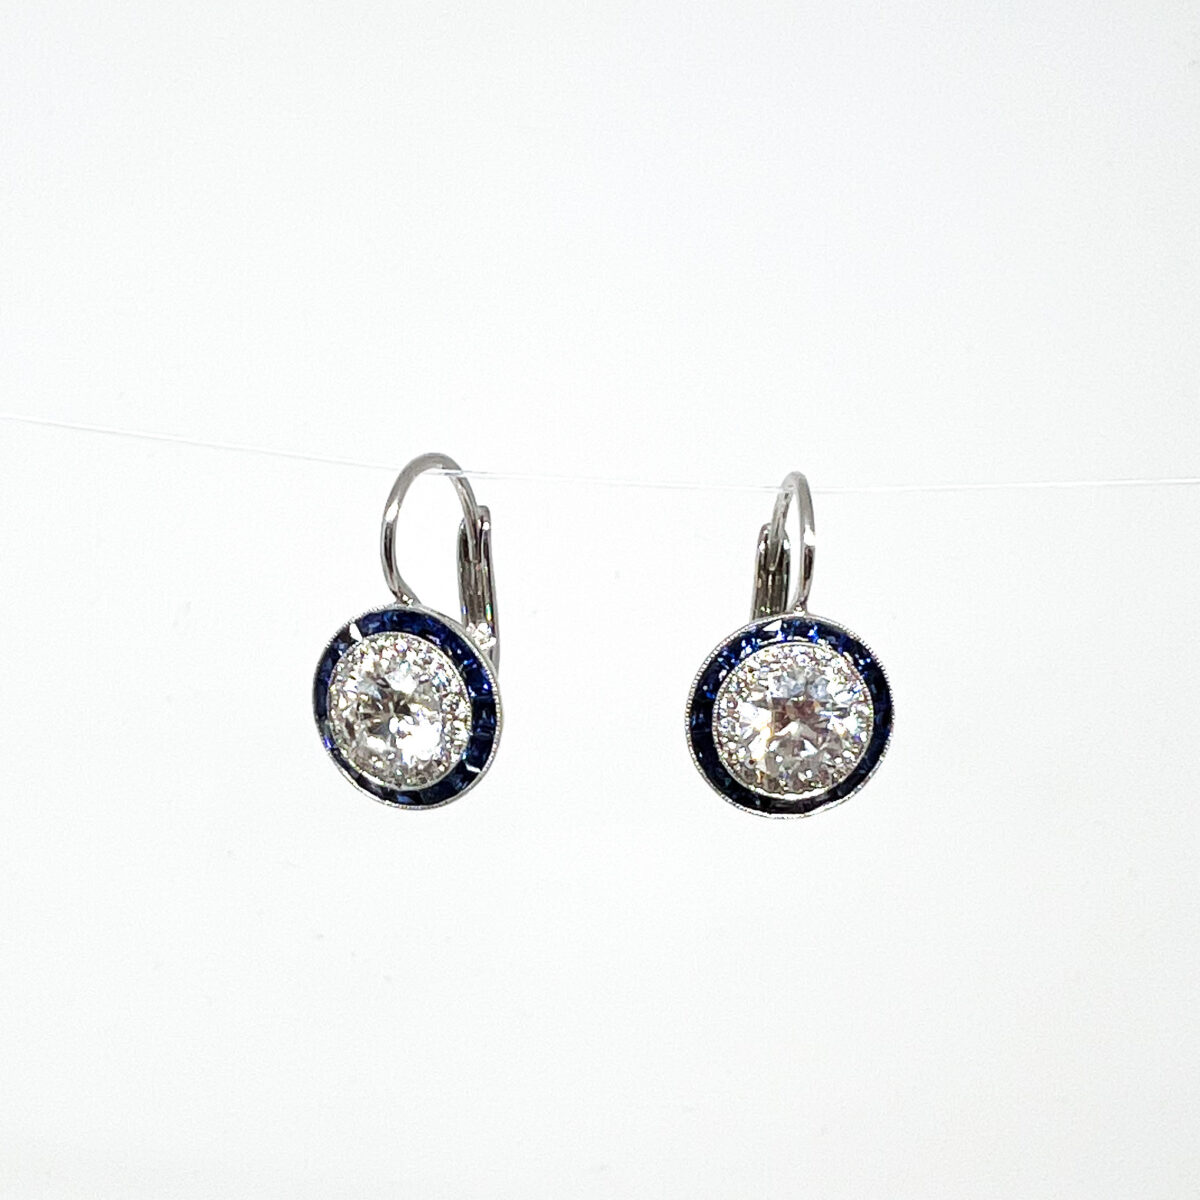 White Gold, Diamond and Sapphire Drop Earrings